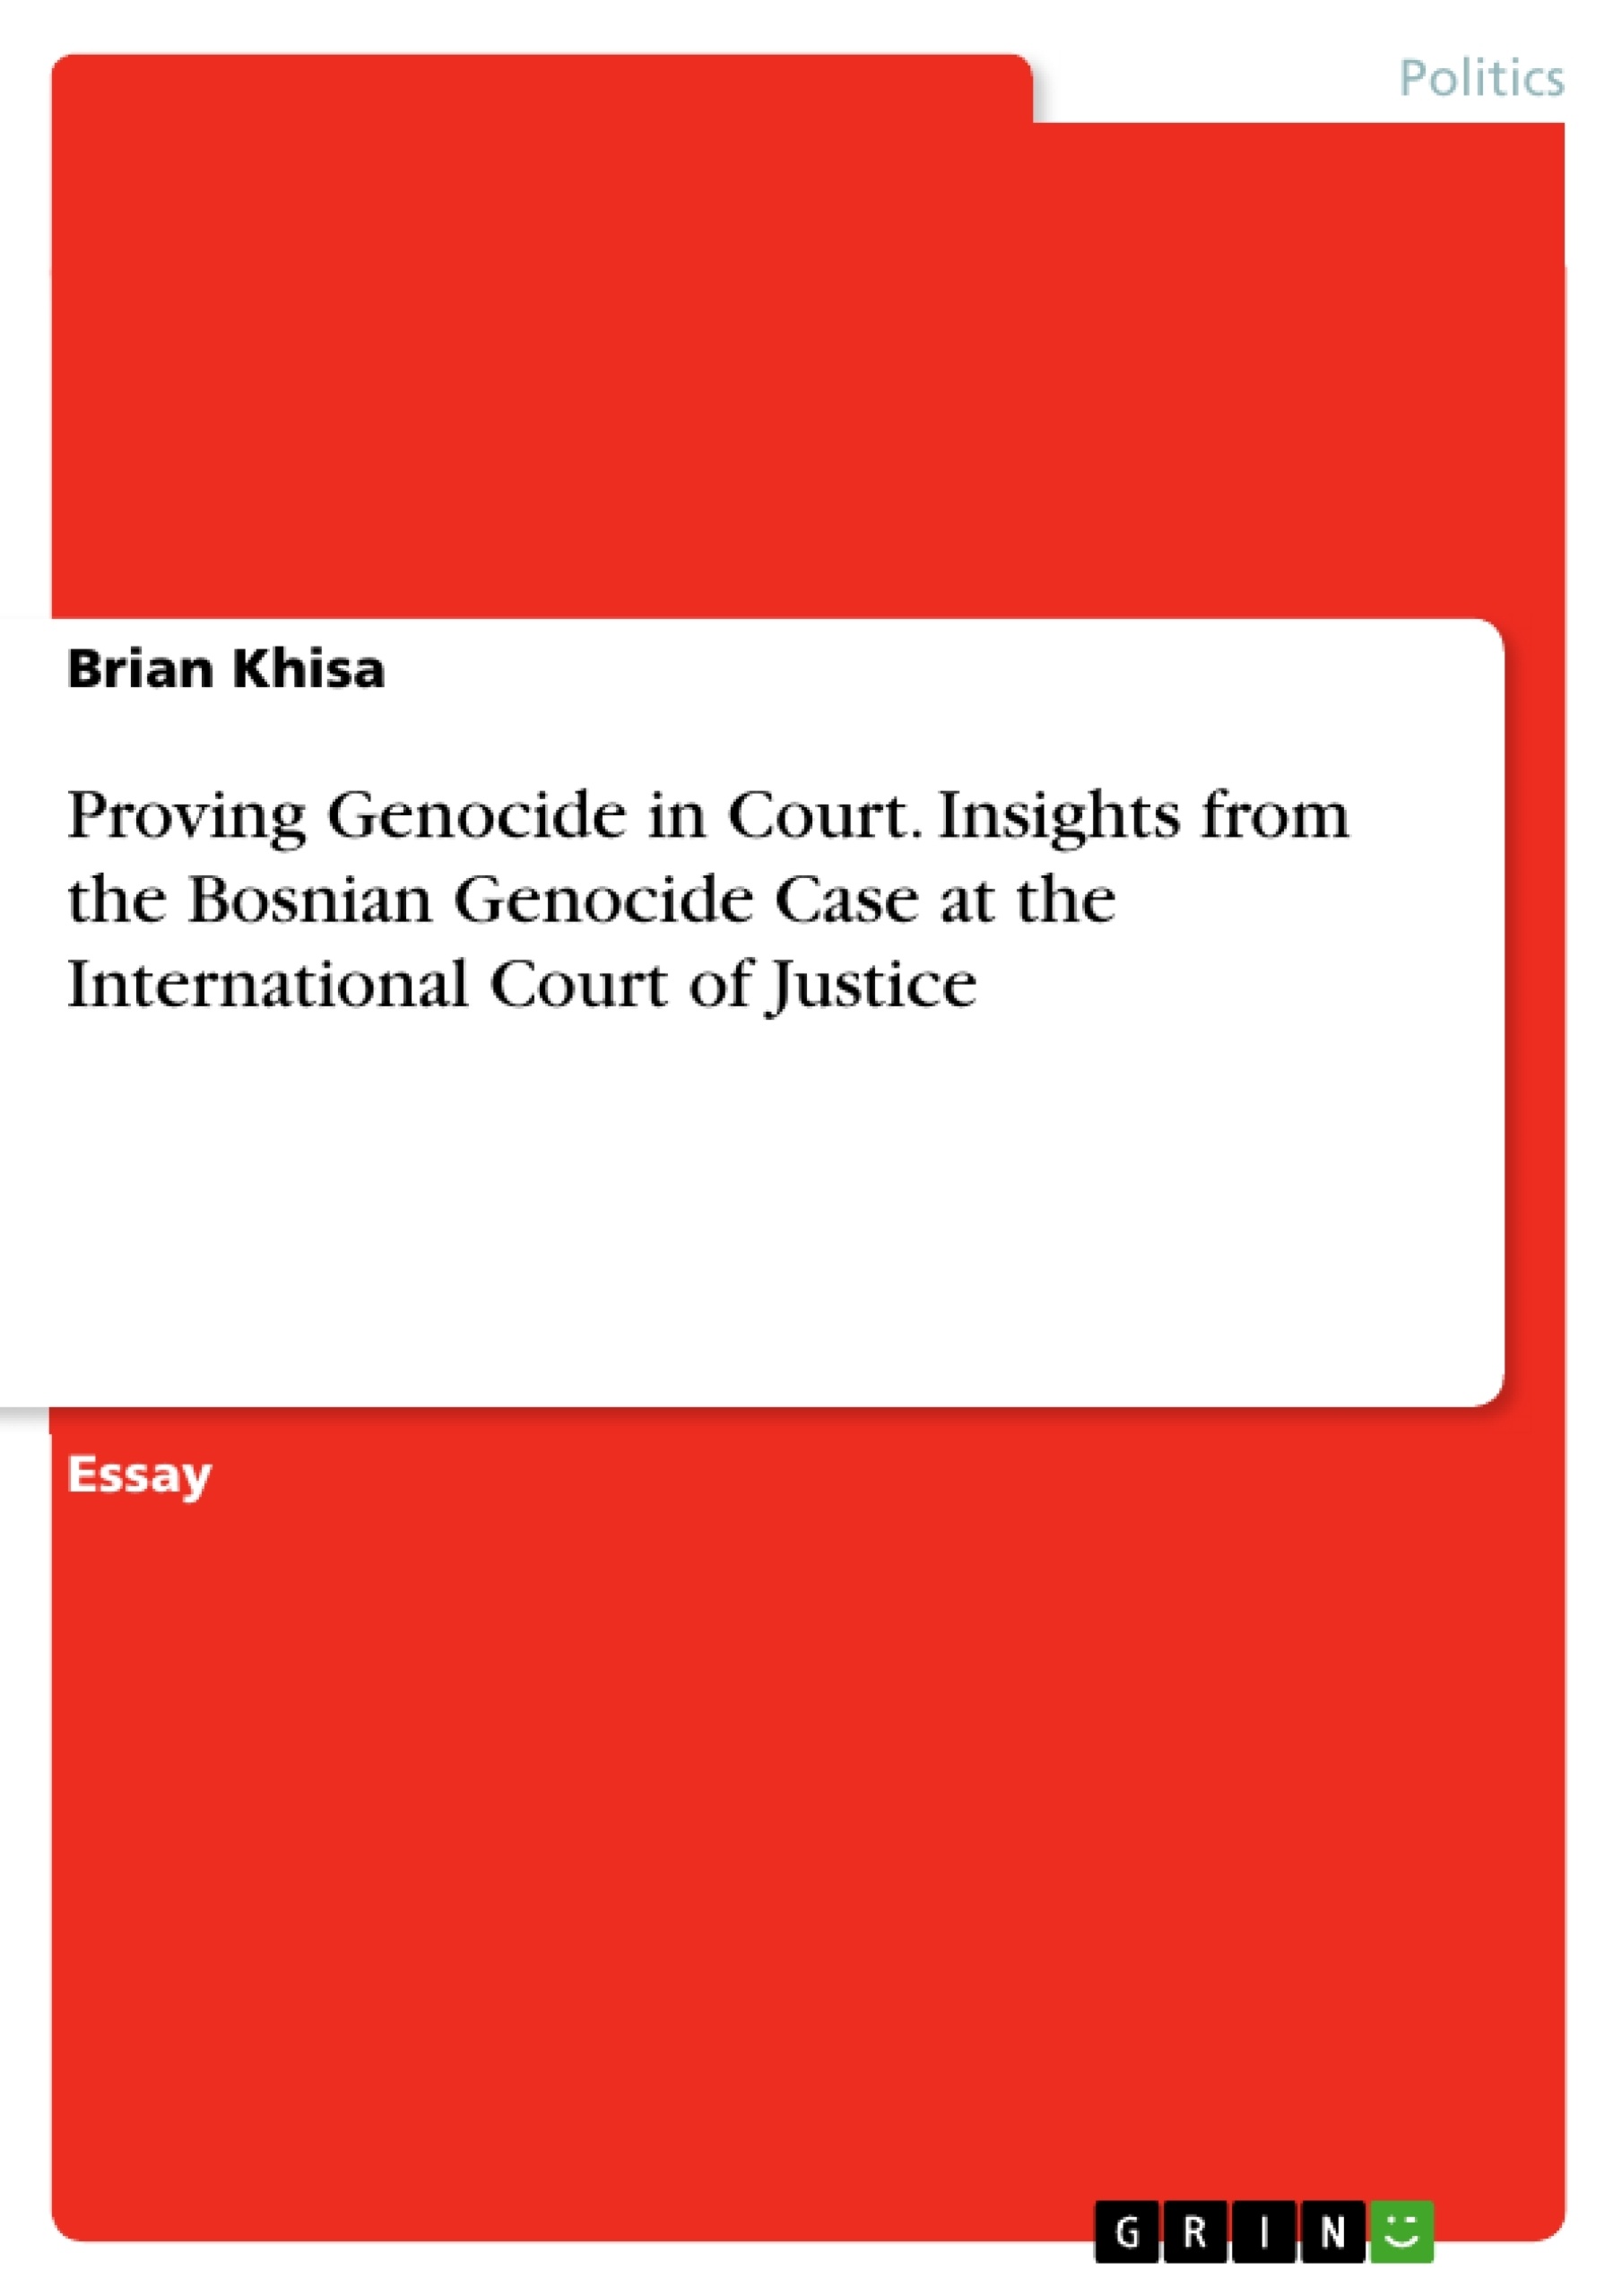 Title: Proving Genocide in Court. Insights from the Bosnian Genocide Case at the International Court of Justice